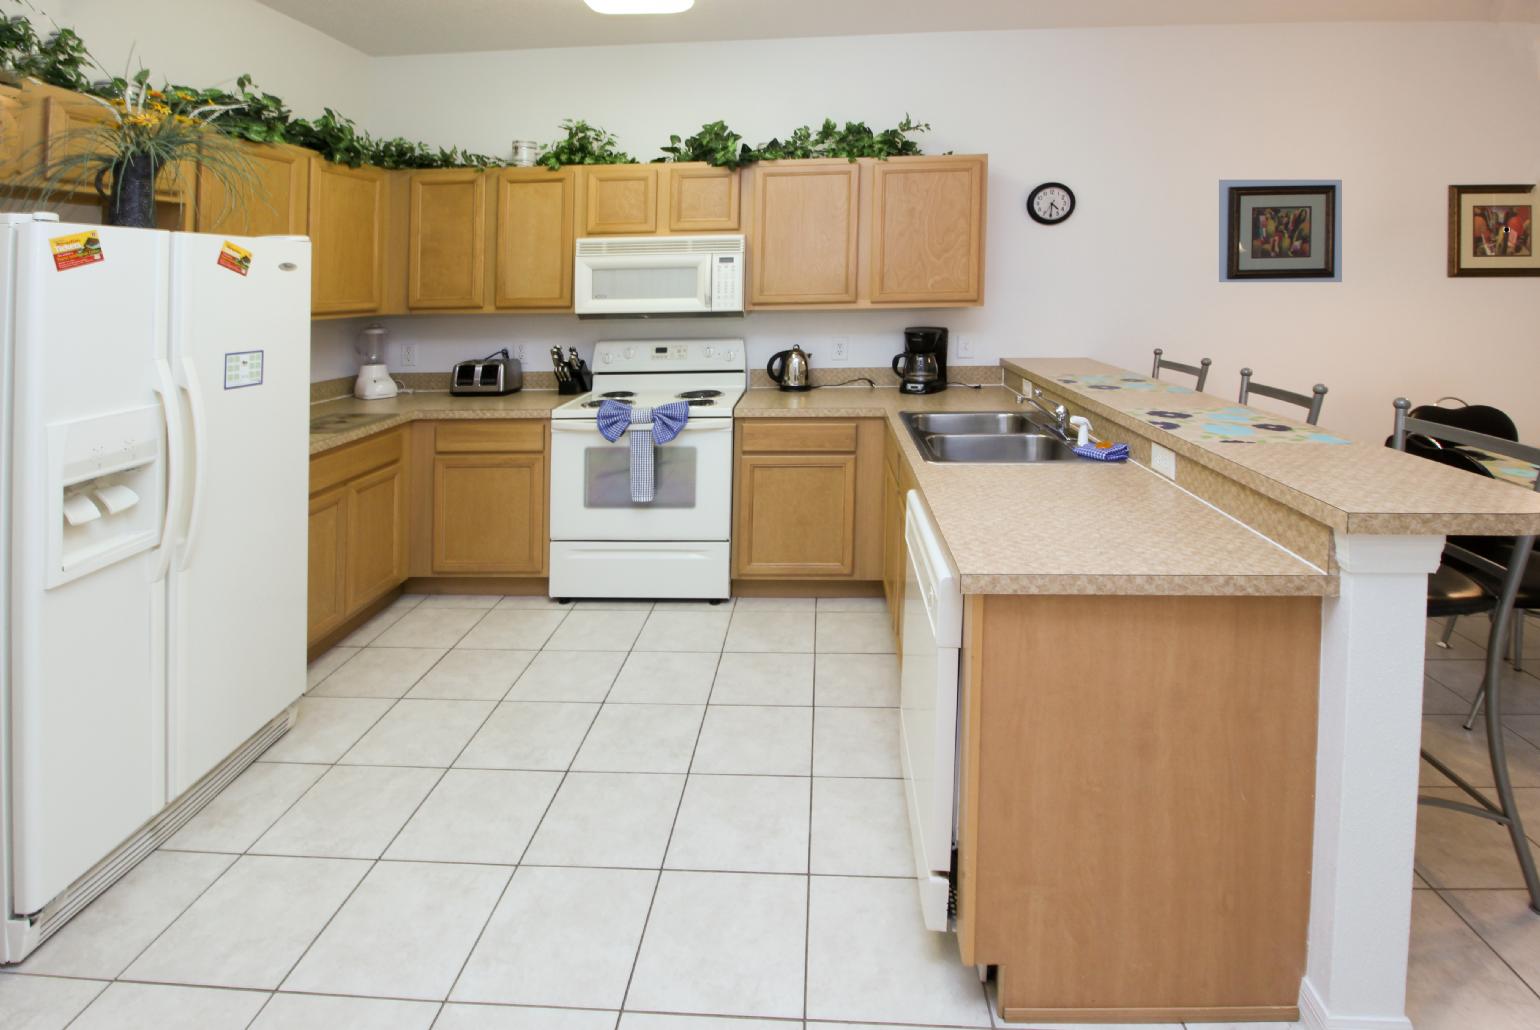 Equipped kitchen with dining area.